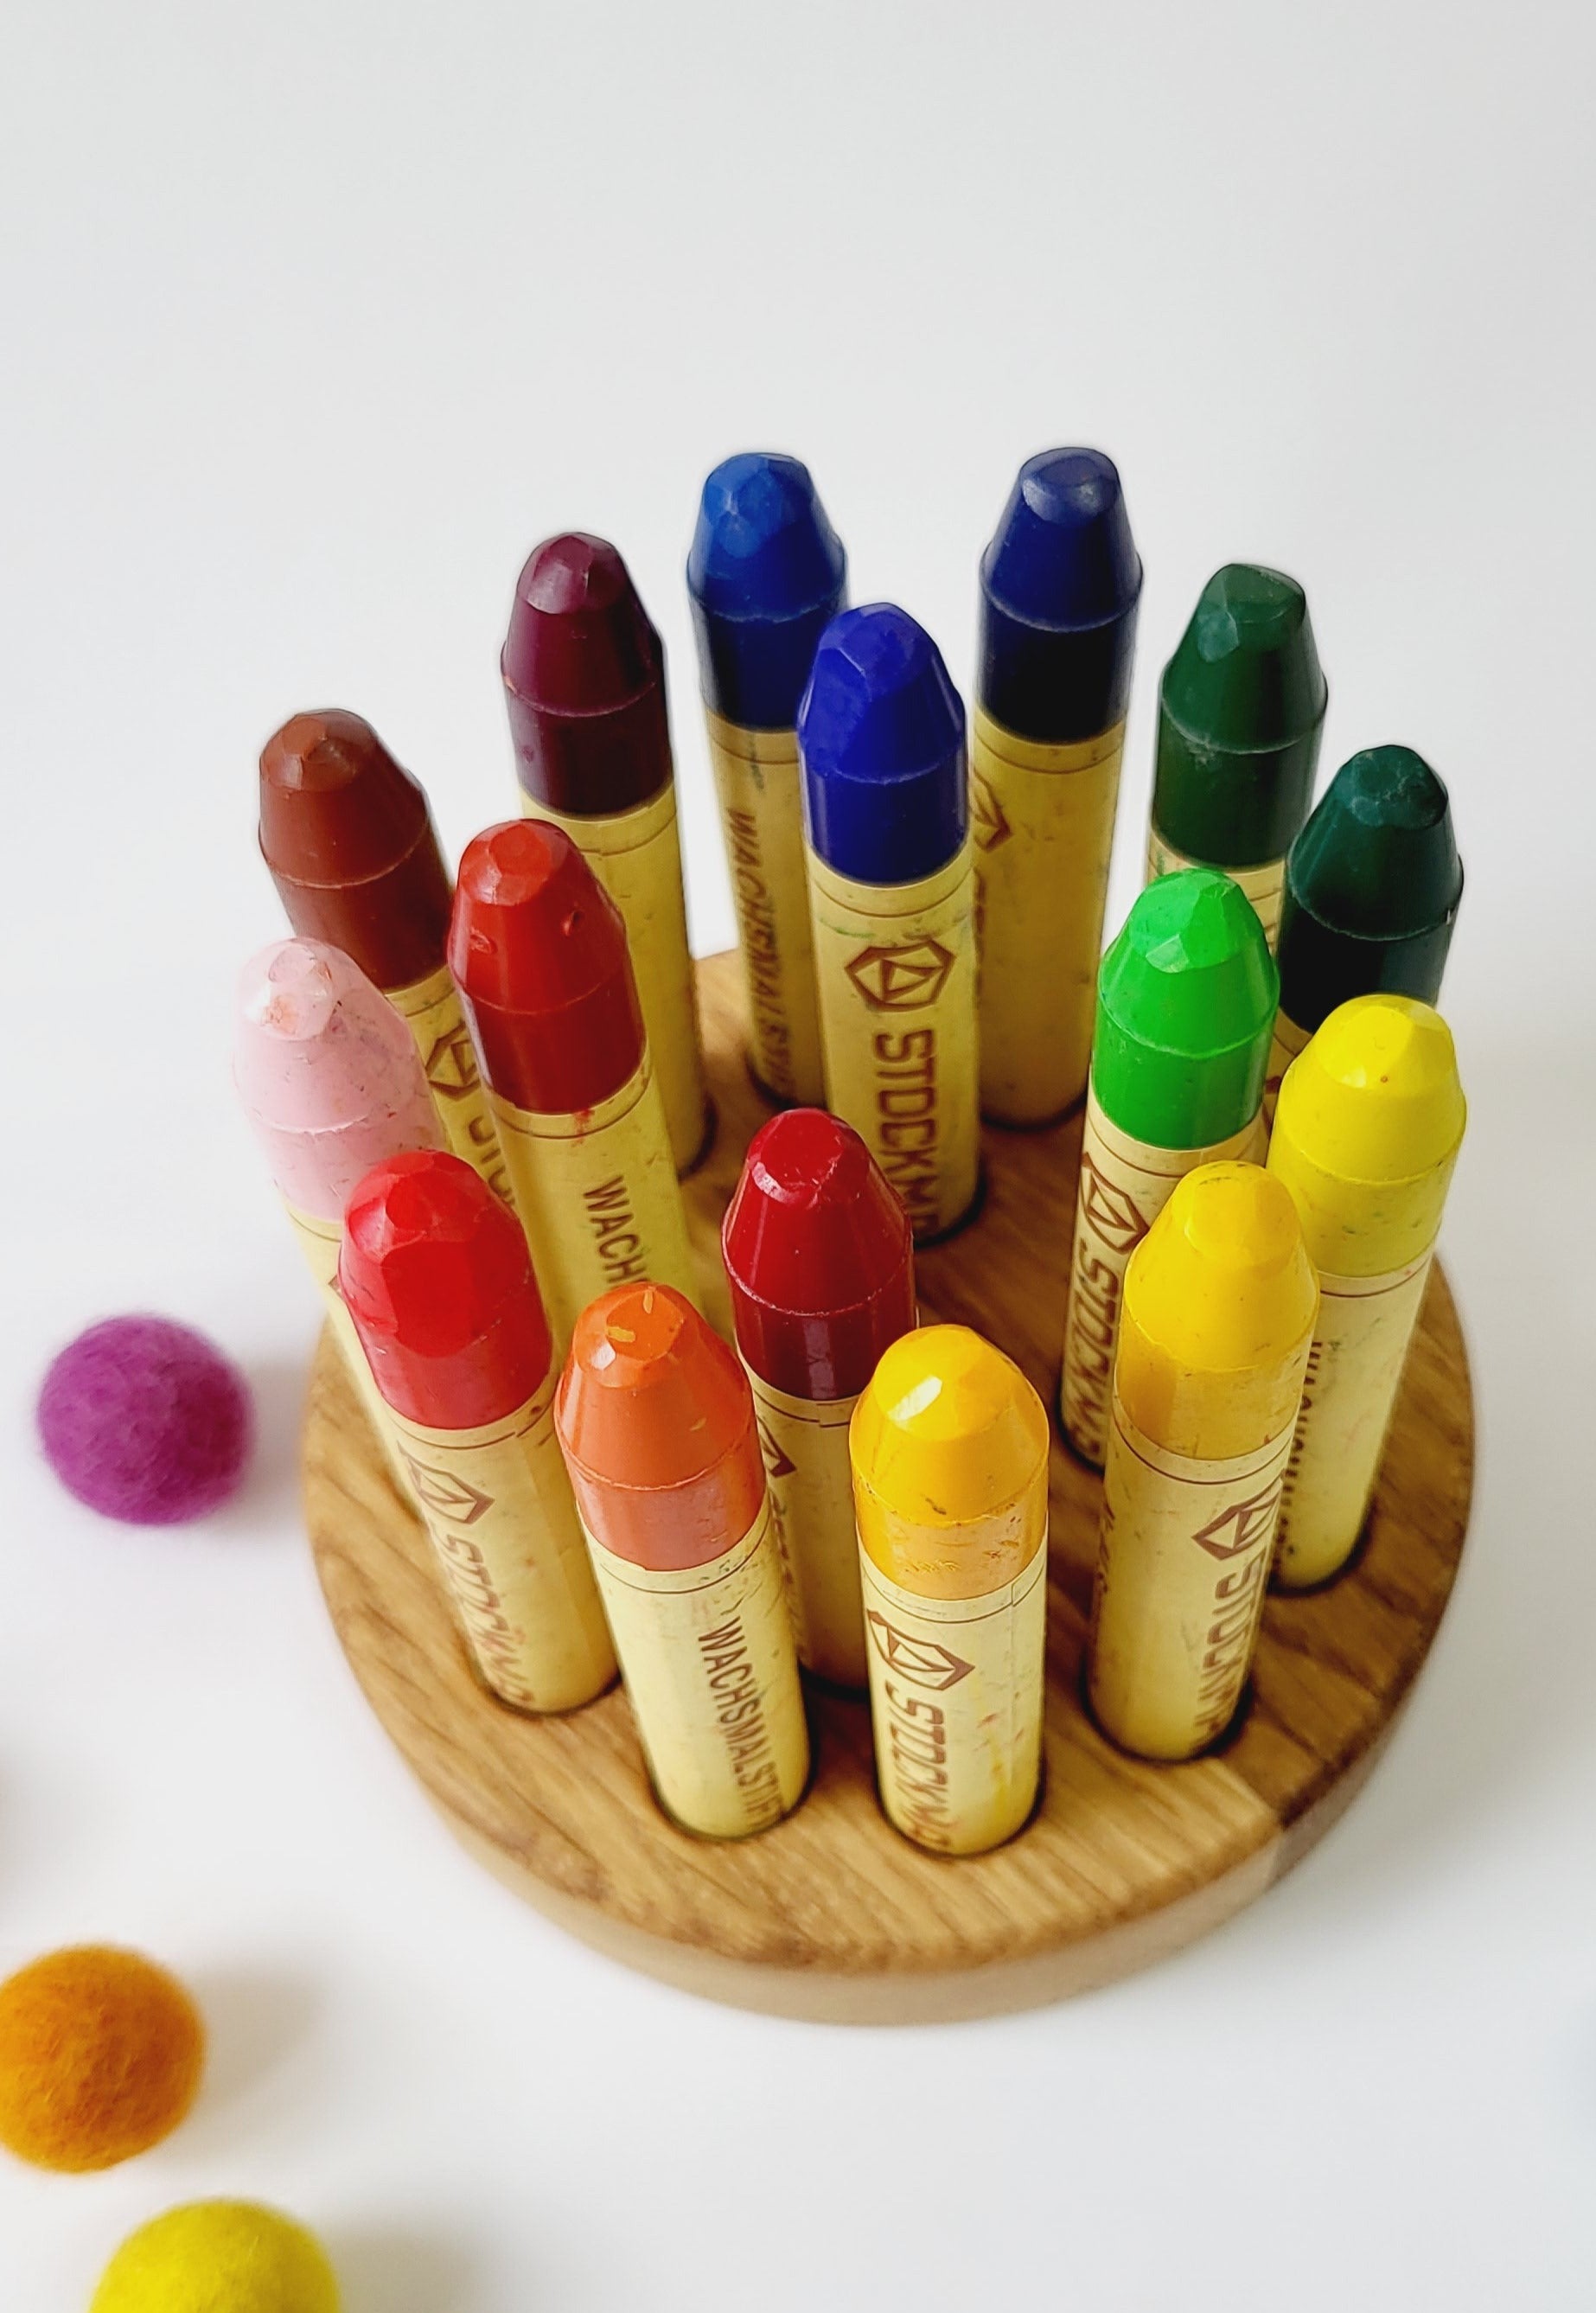 Stockmar crayon holder for 16 sticks, desk organization waldorf crayon holder without crayons, personalized gift for kids